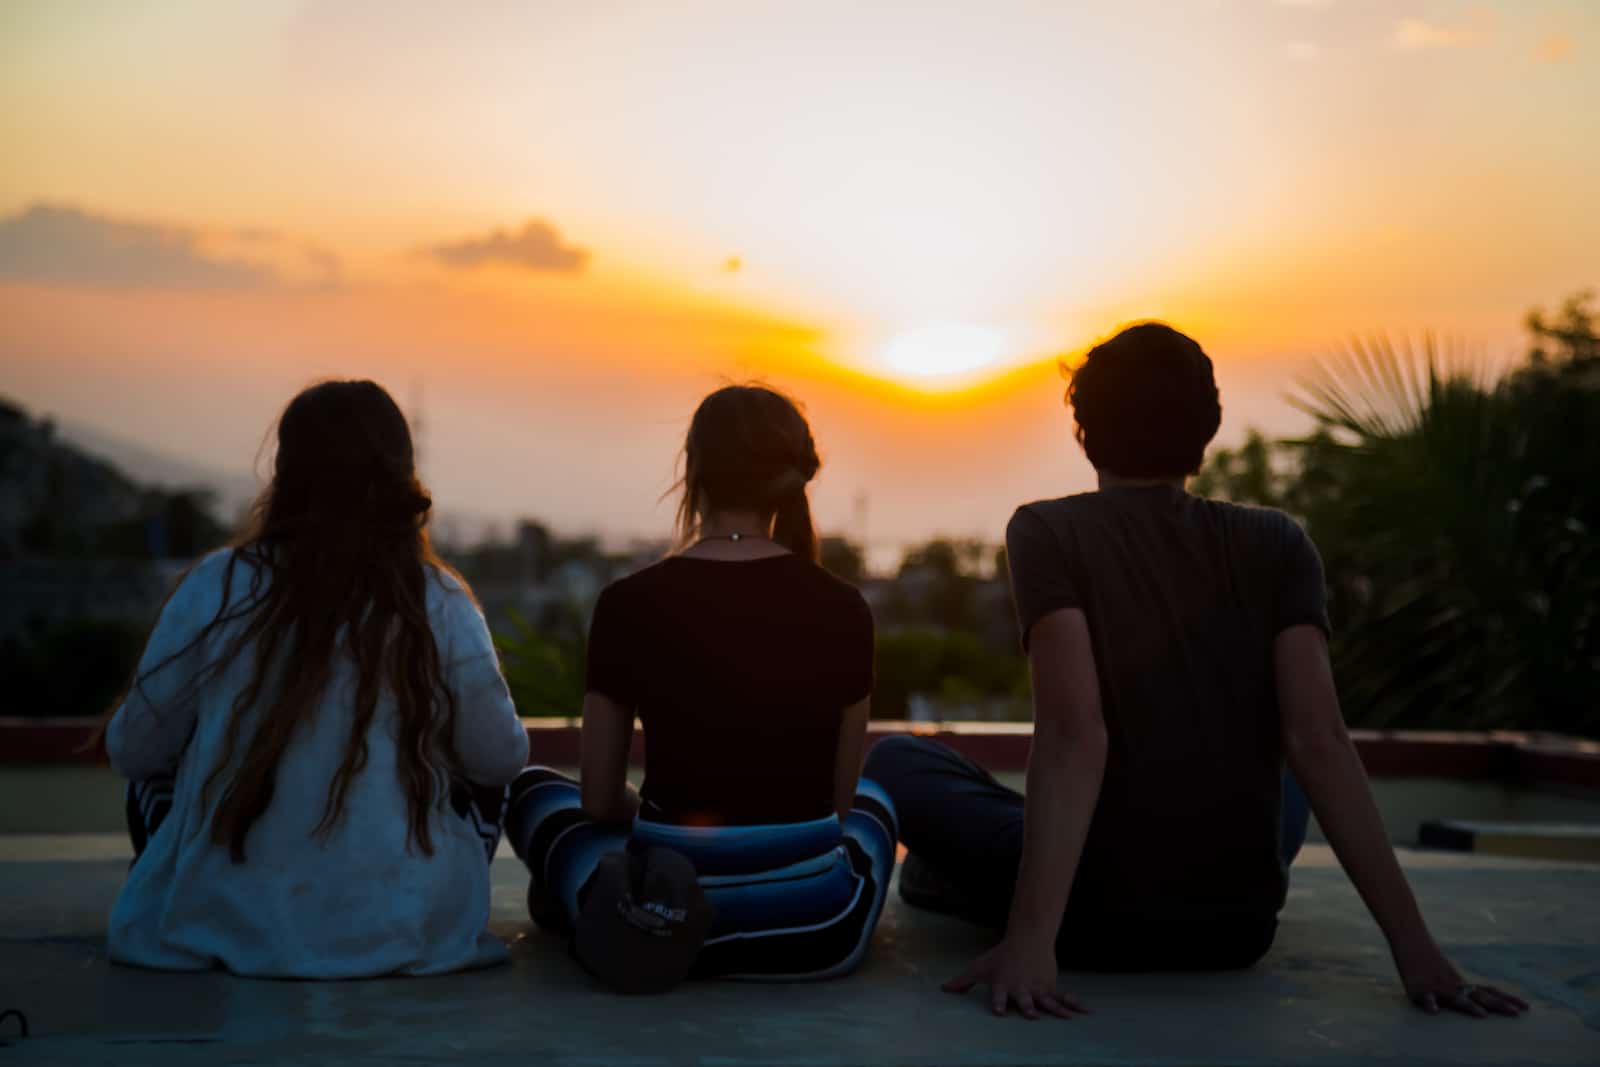 Three people sit cross-legged in front of a sunrise.